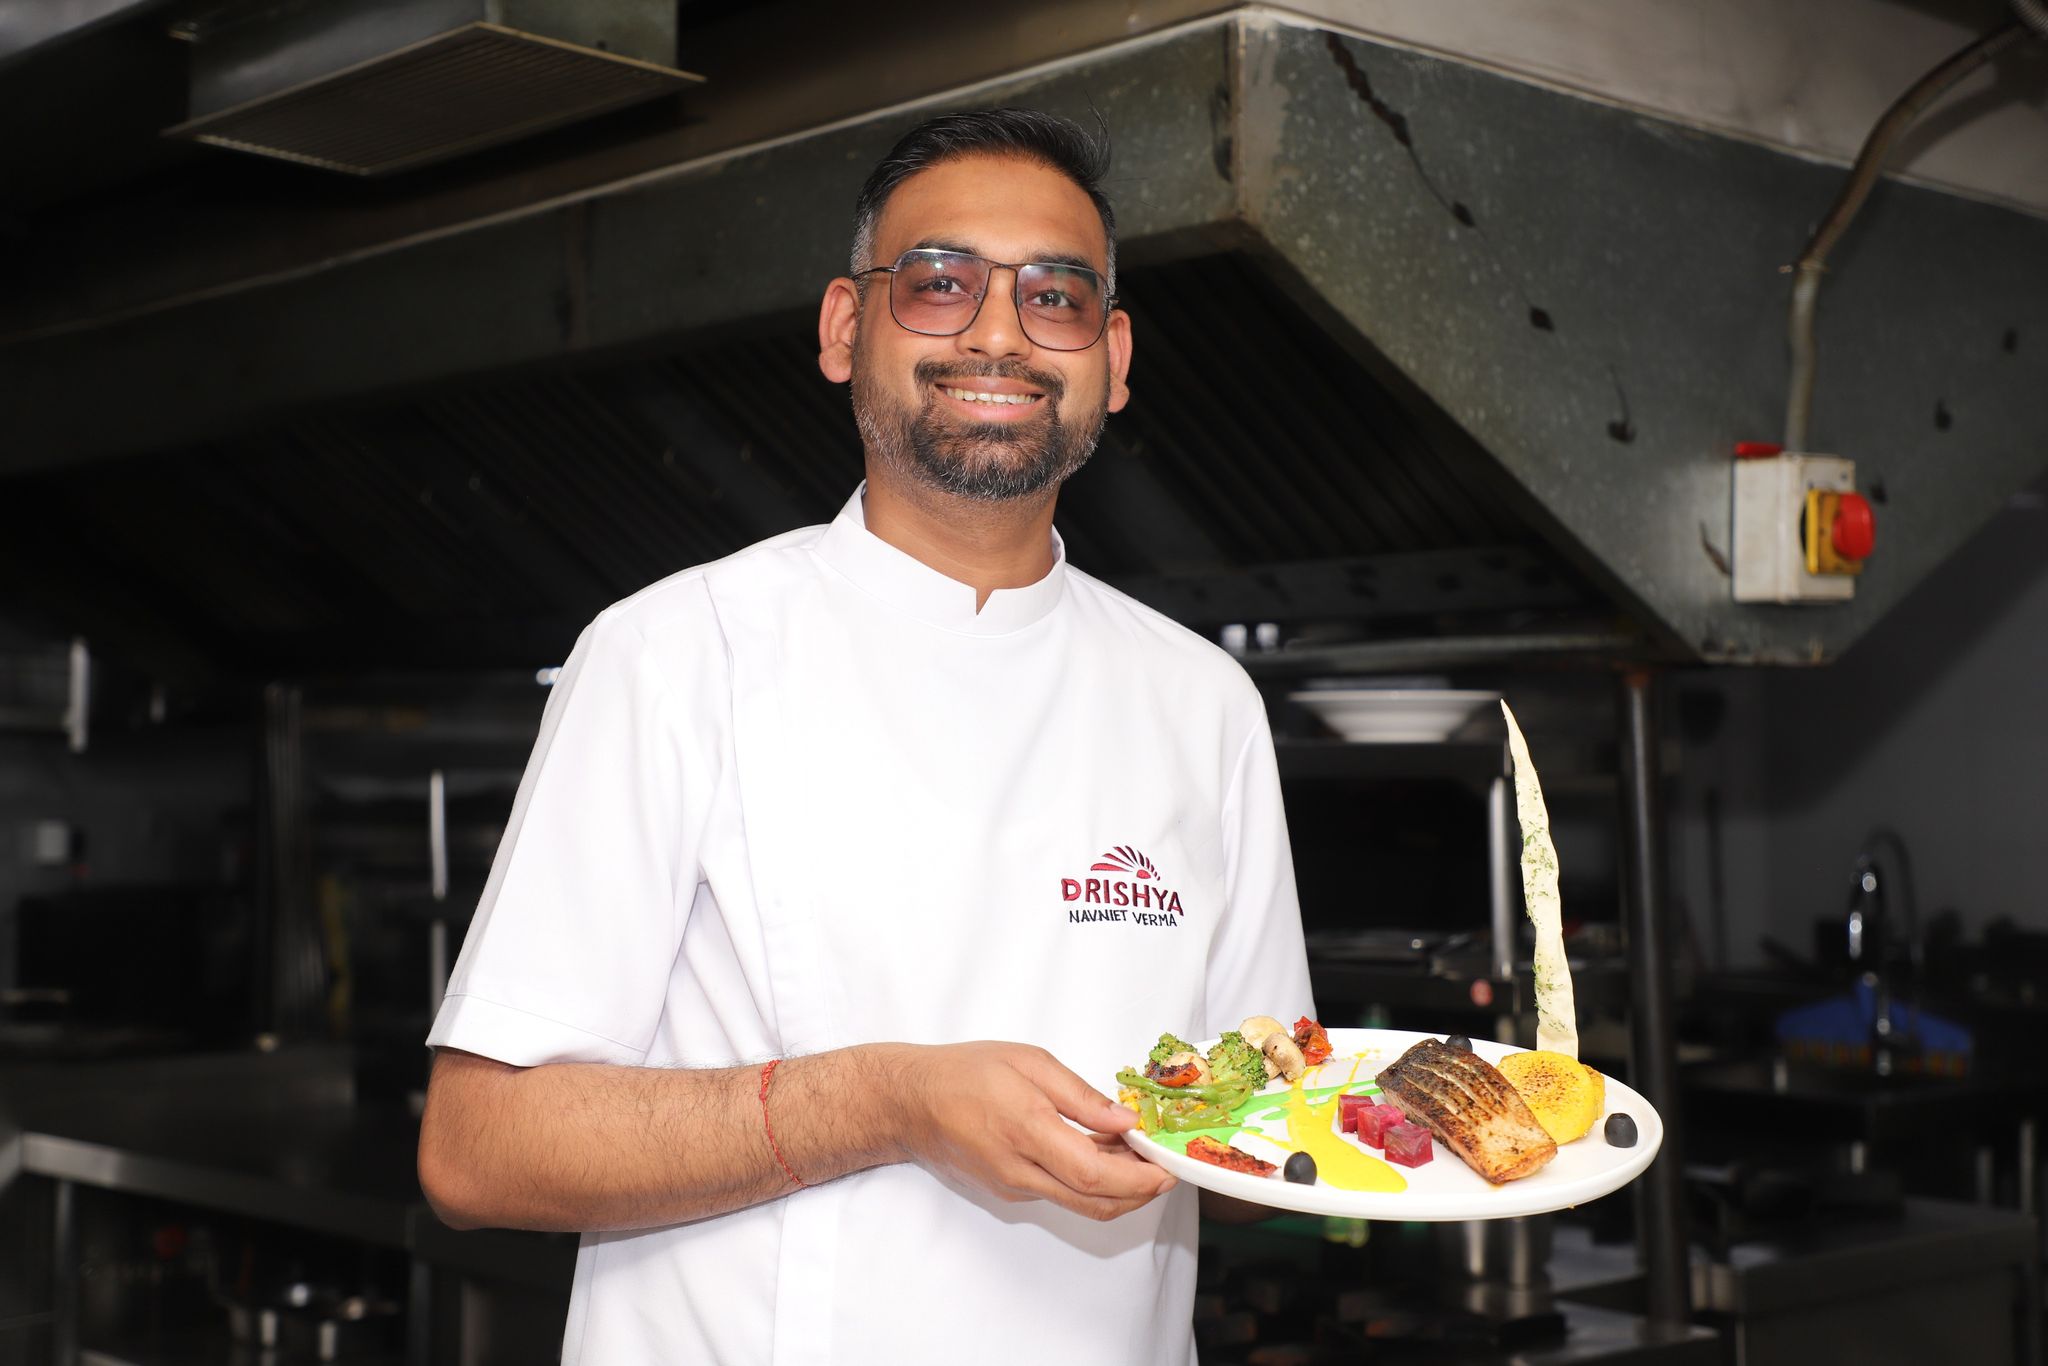 Looking for new taste this new year: Here is Drishya Lounge’s grilled salmon recipes (with video)